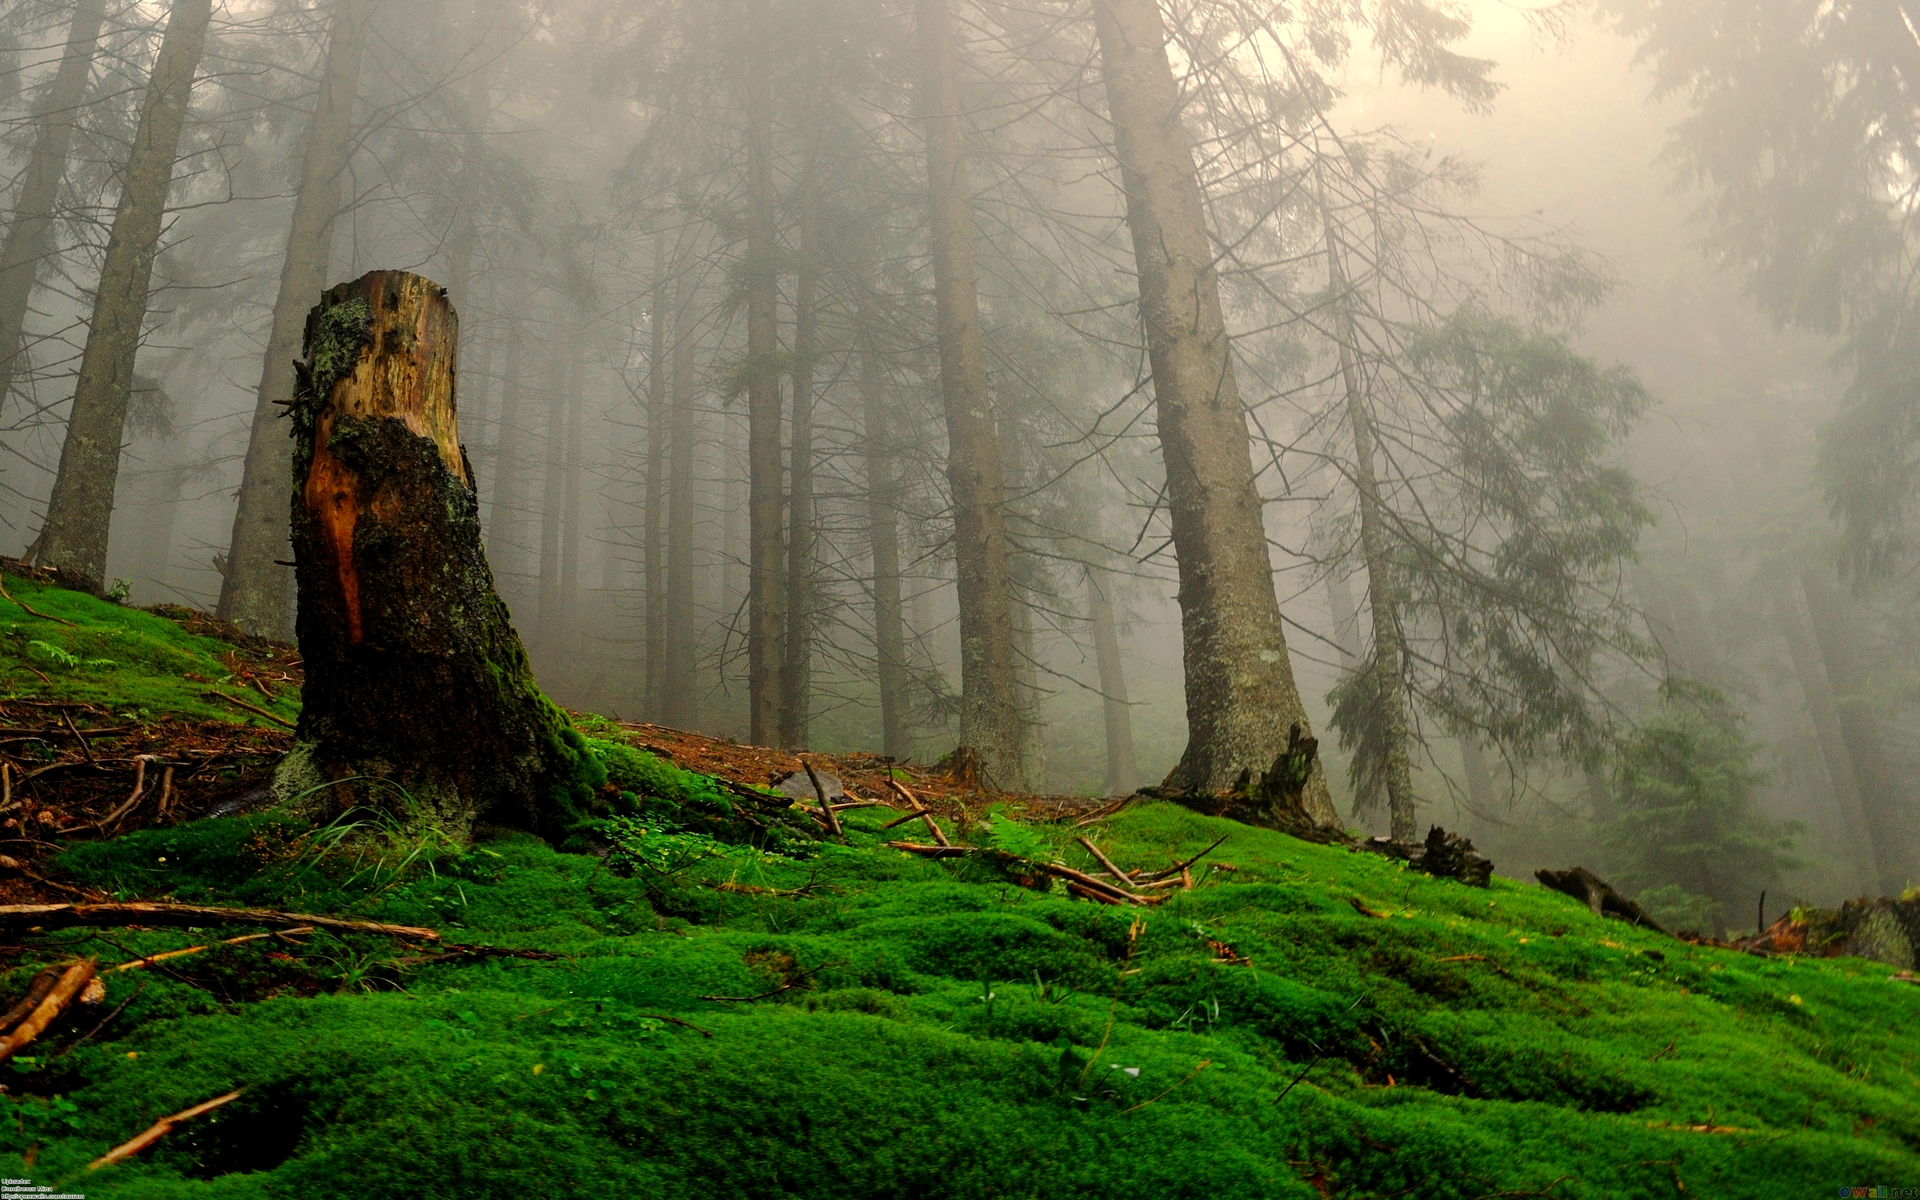 Enchanted » Live Hd Enchanted Wallpapers, Photos - Enchanted Forest Desktop Backgrounds , HD Wallpaper & Backgrounds